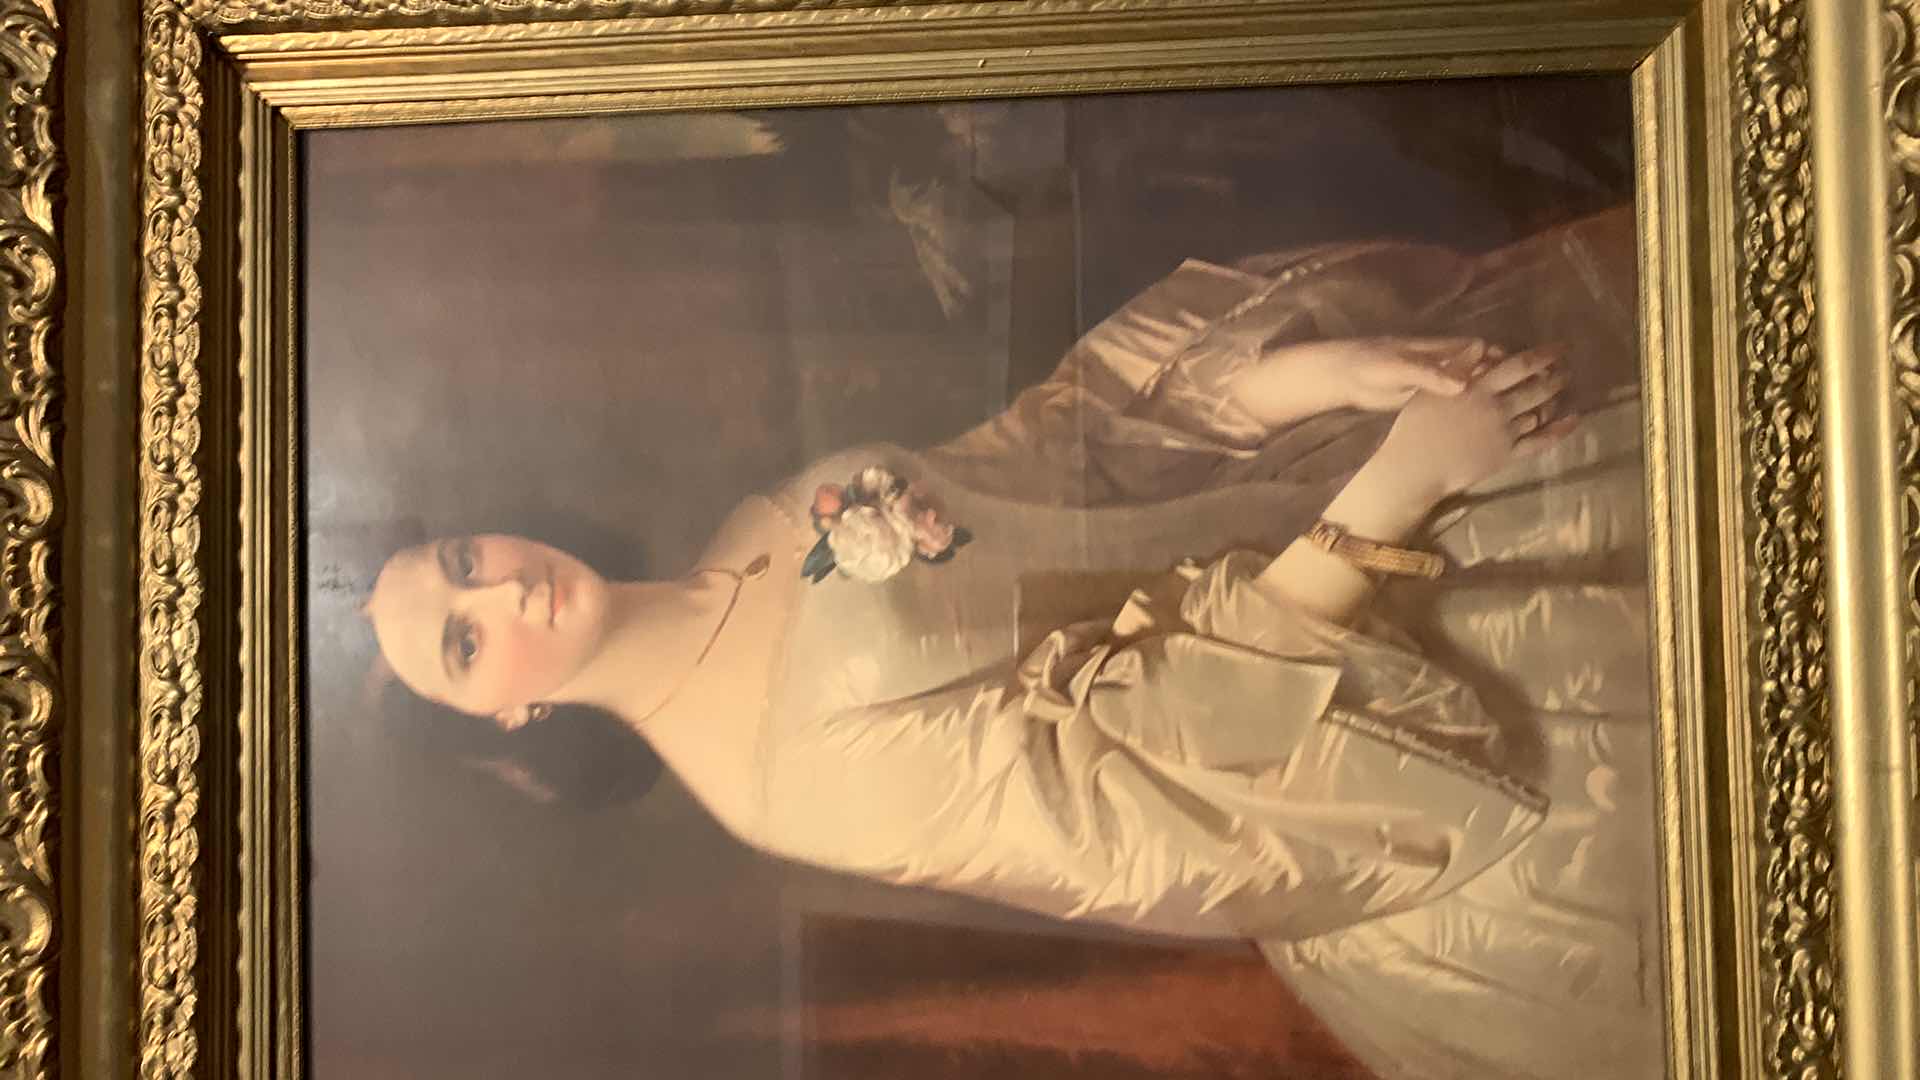 Photo 3 of A framed vintage reproduction of “Southern Belle” by Erich Correns:, Artist: Erich Correns ( 1821 - 1877) Munich, German München., Erich Correns ...
Priced without elaborate frame approx $1200 (stand not included)